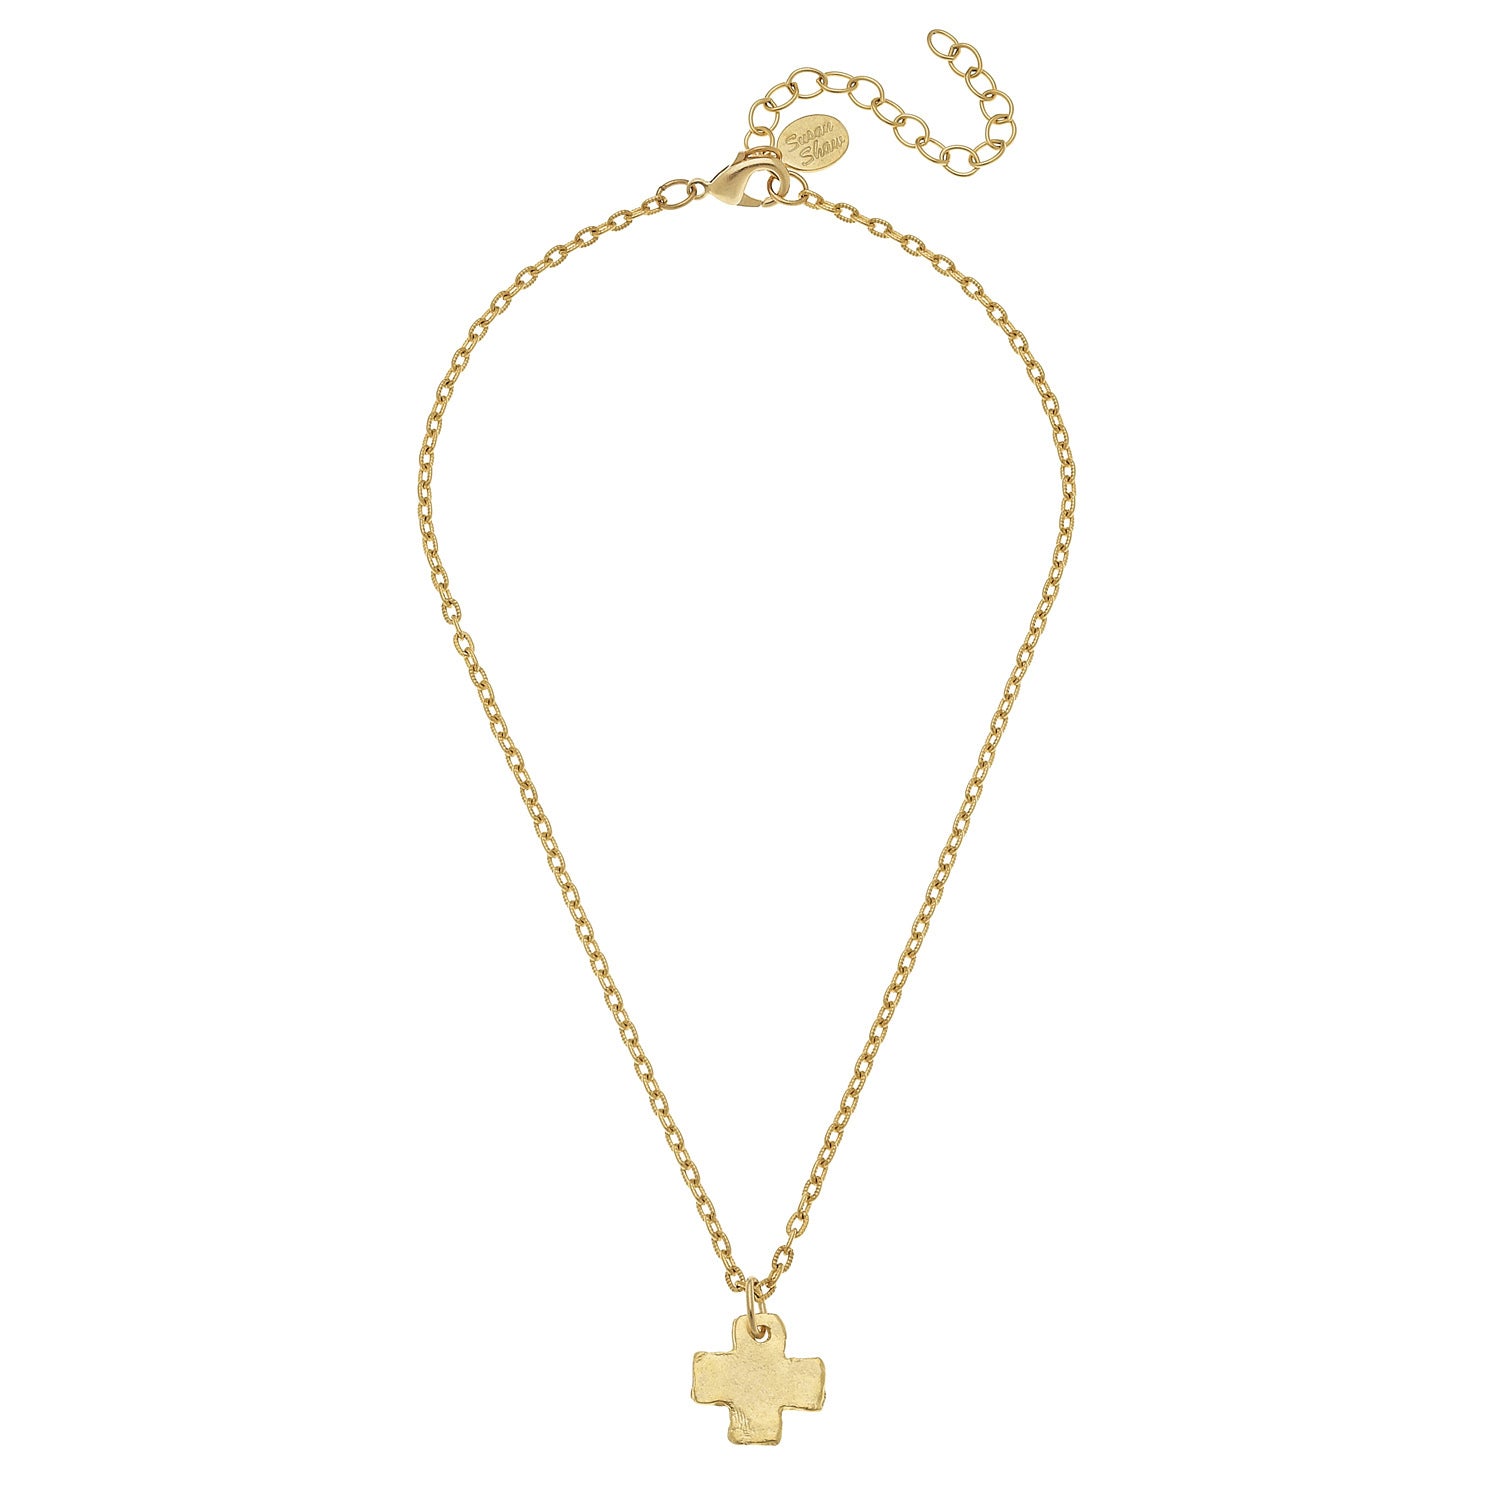 Susan Shaw Handcast Gold Cross Necklace, 16+3"